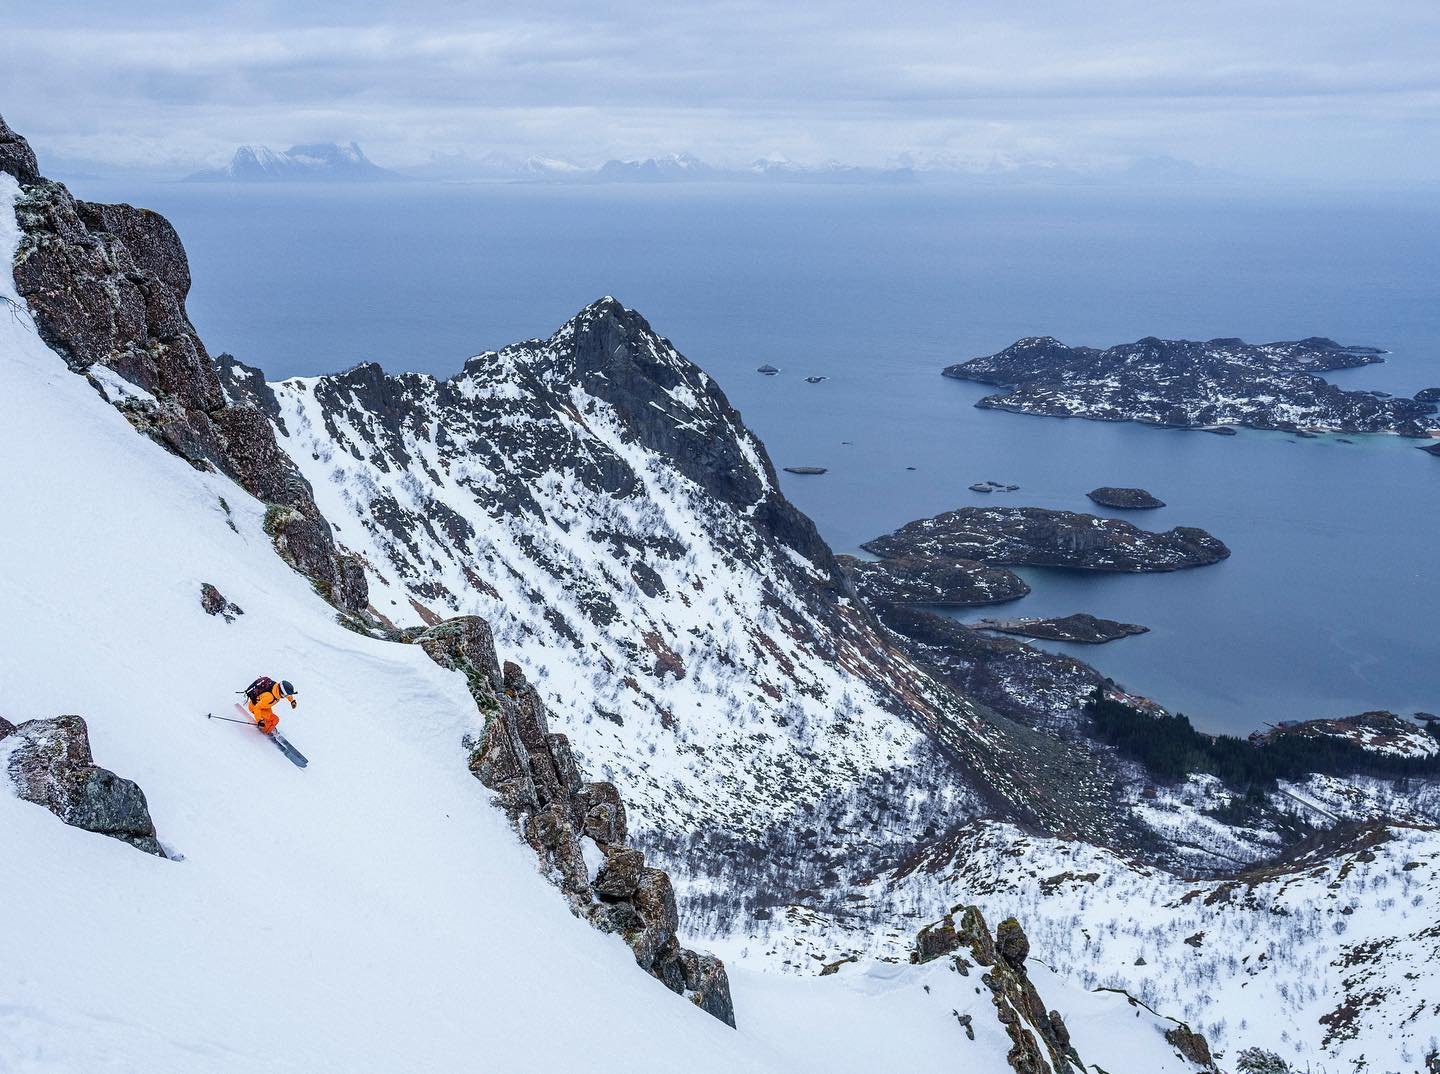 Norway has been on my bucket list for a long long time and I have to say, my Norway dreams sure looked a lot like this&hellip; #skiingtothesea #northofnorway #welcometonature @norrona @norronaadventure 📸 @chrisholter